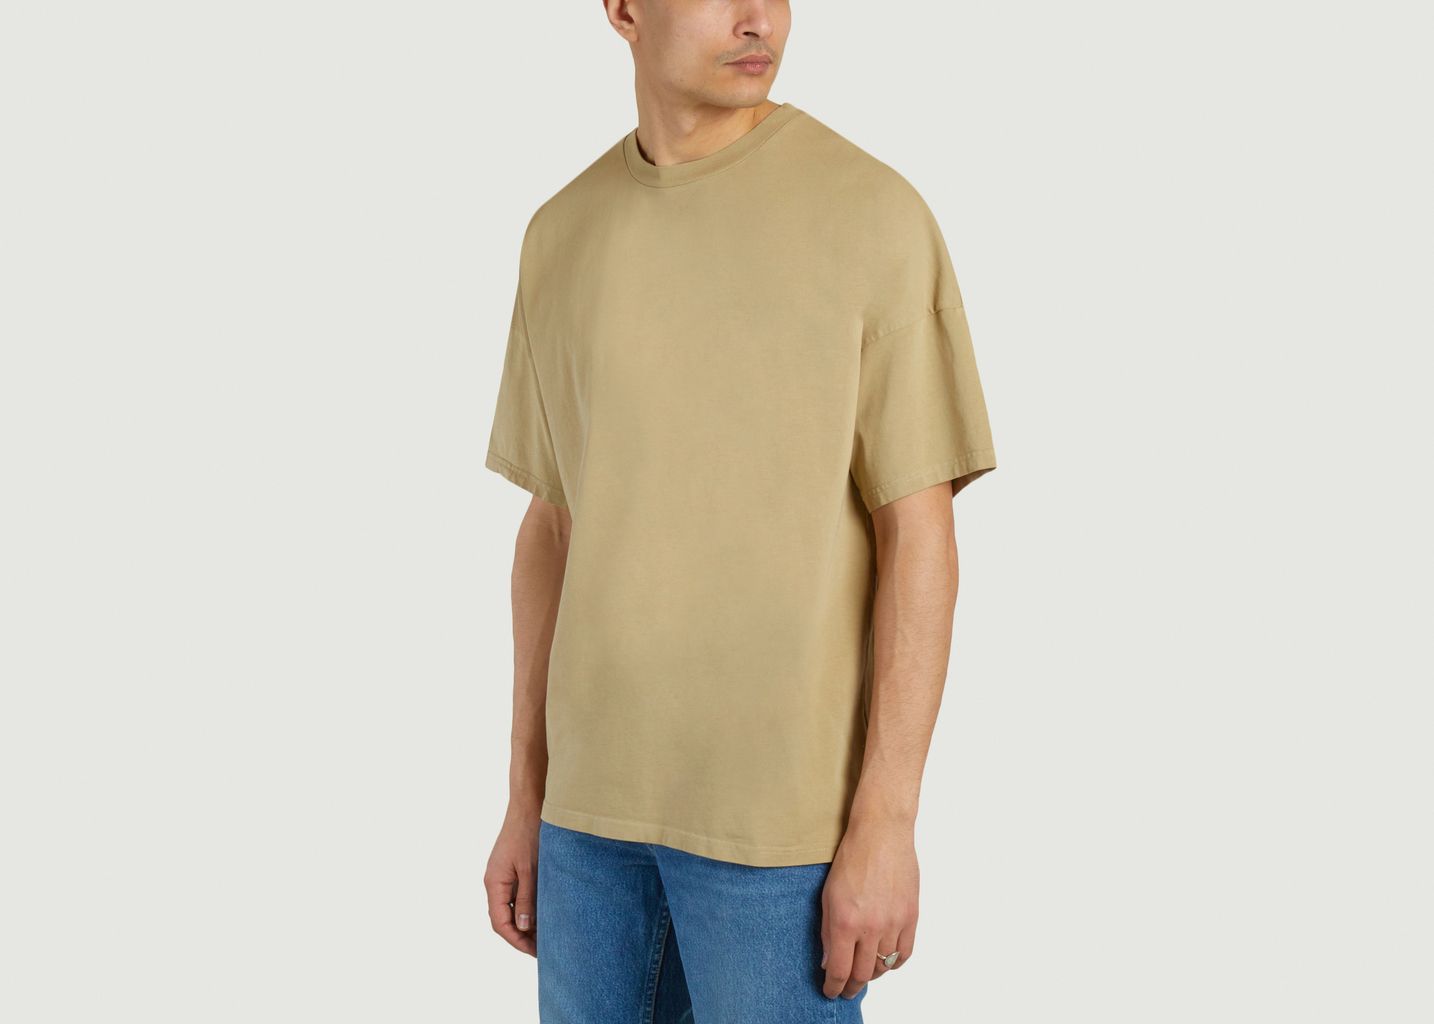 Fizvalley loose-fitting cotton T-shirt - American Vintage